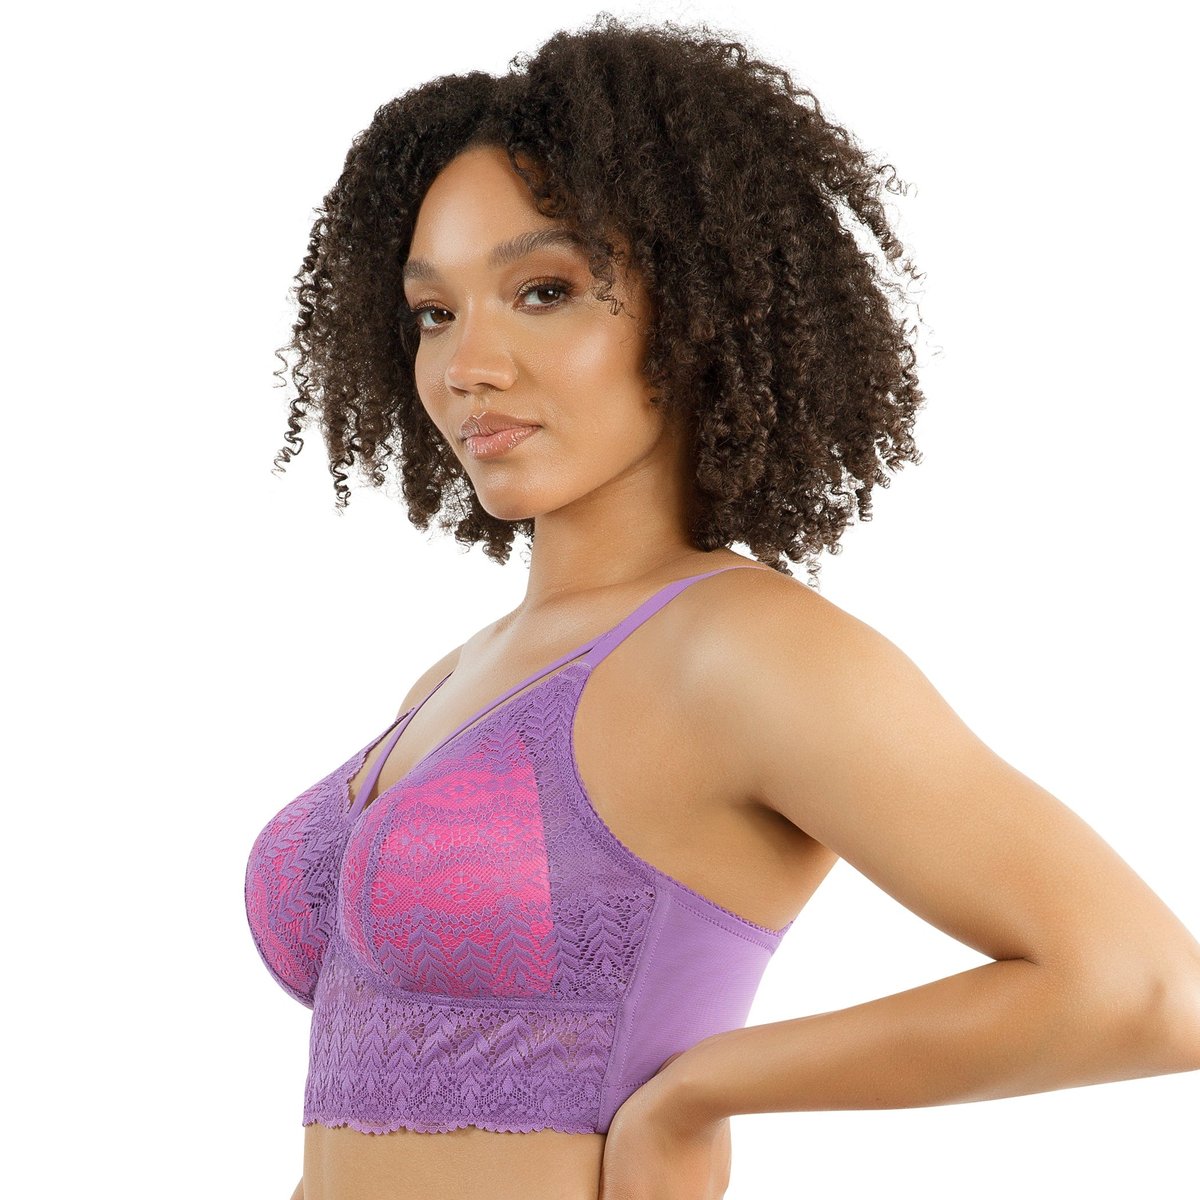 PARFAIT Light Orchid Mia Lace Wire-Free Padded Lace Bralette - Light Orchid